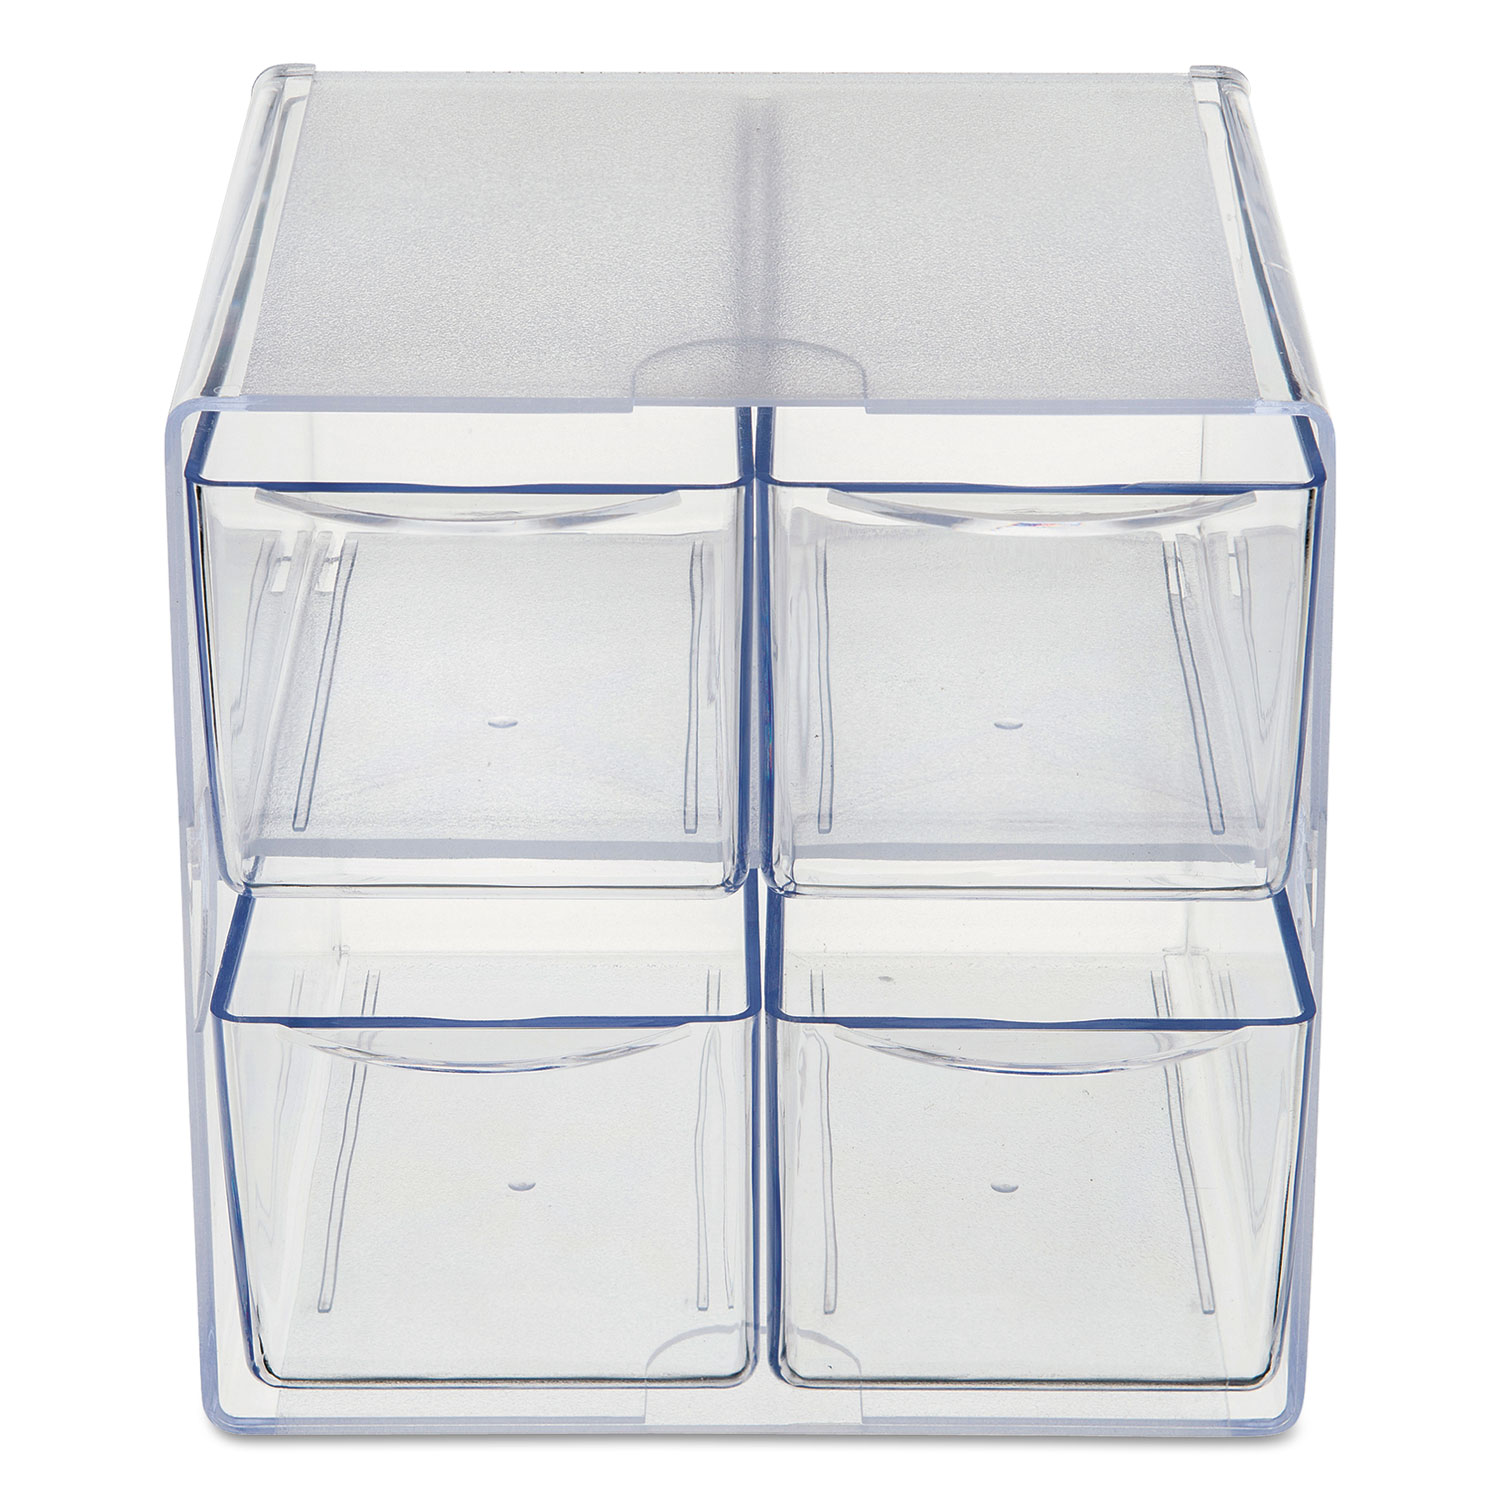 Stackable Cube Organizer, 4 Compartments, 4 Drawers, Plastic, 6 x